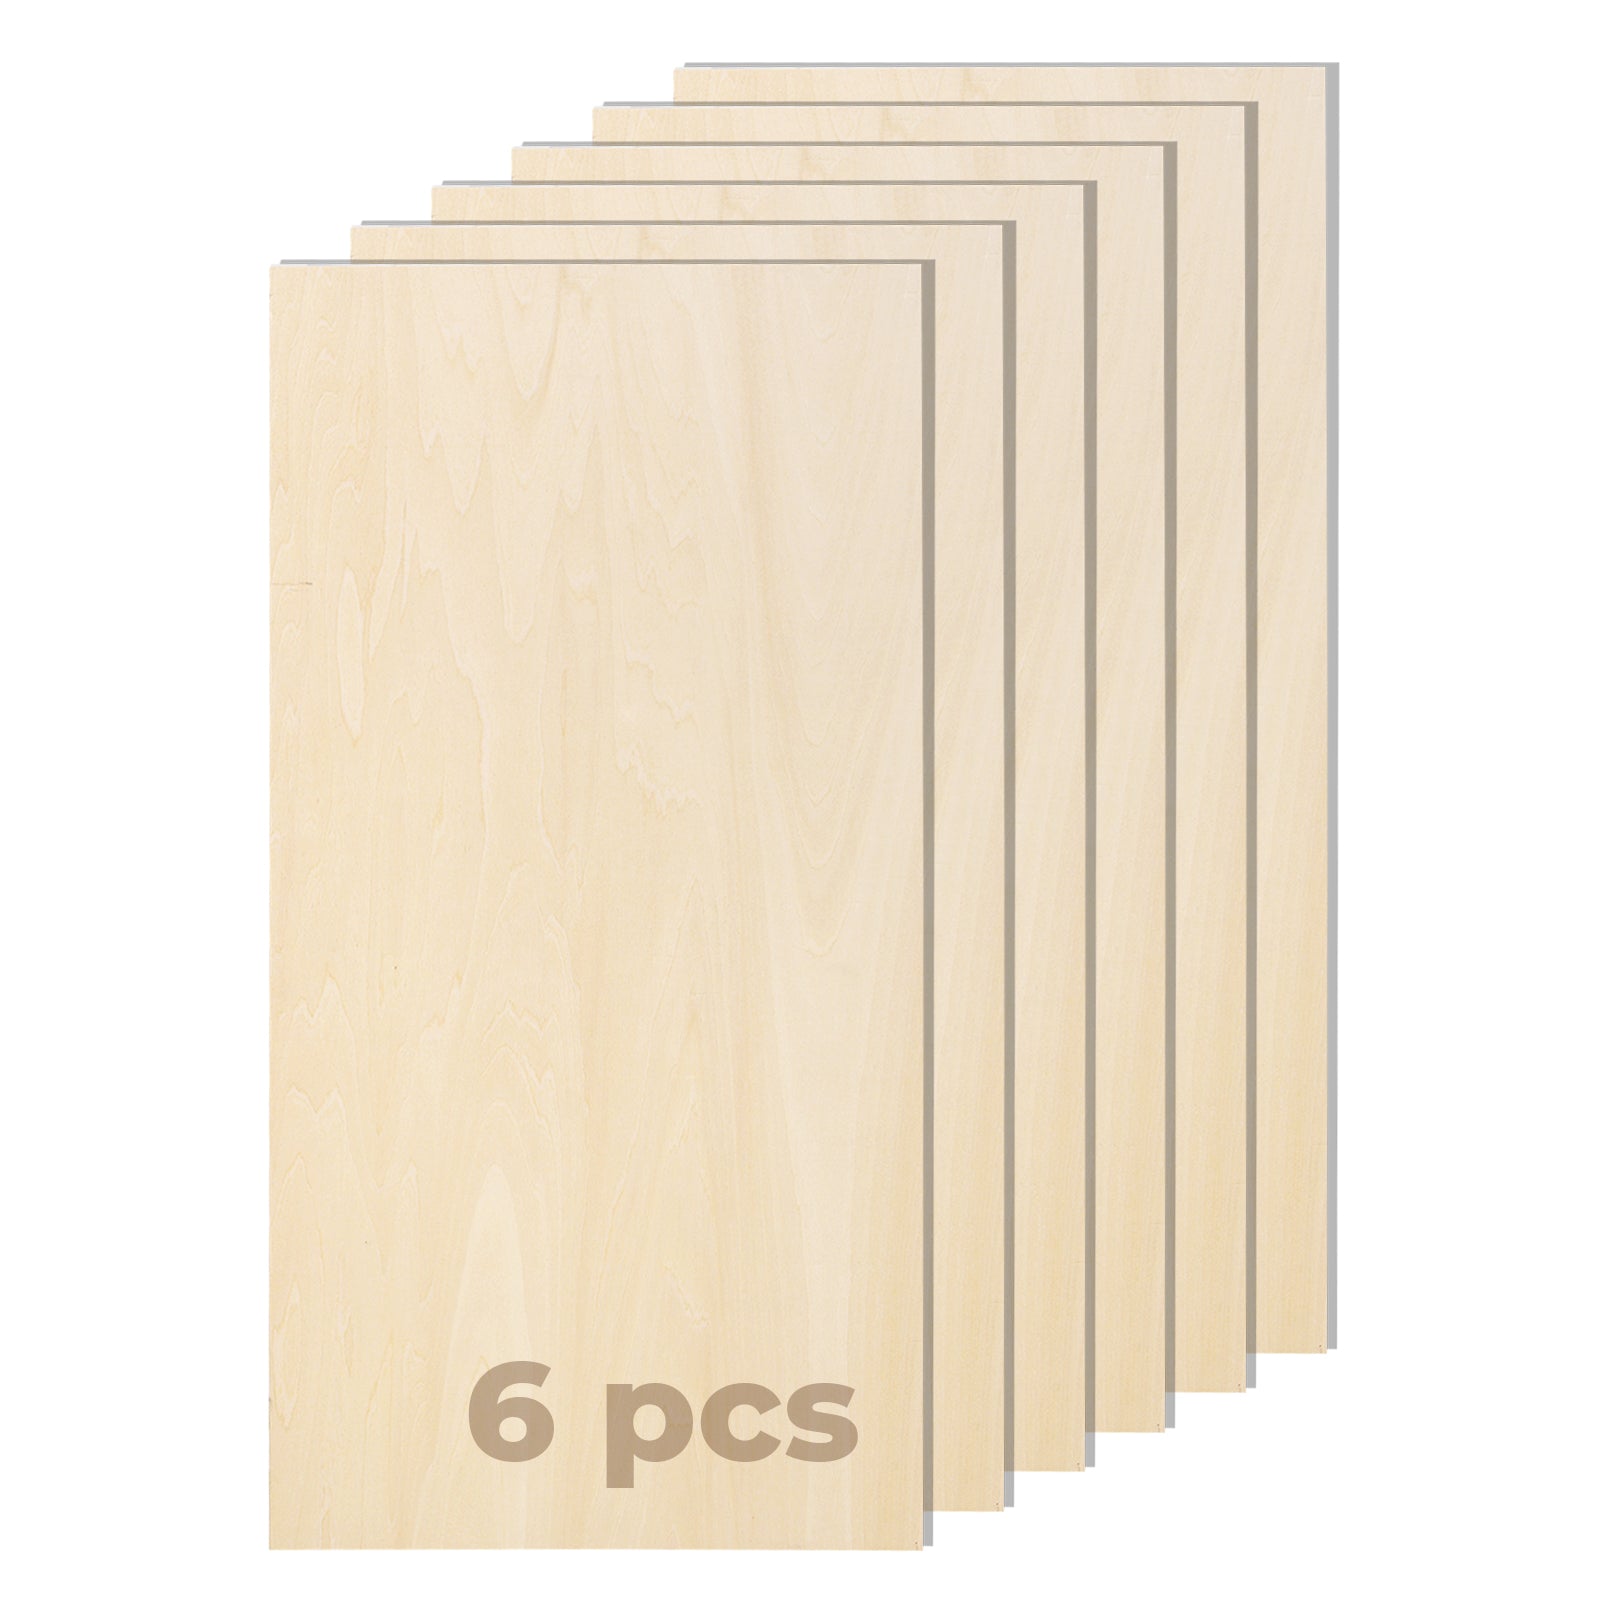 4X8FT Basswood Plywood Laser Cutting Thin Commercial Basswood Sheets for 3D  Toys Craft - China Laser Cut Plywood, Laser Die Cut Craft Plywood